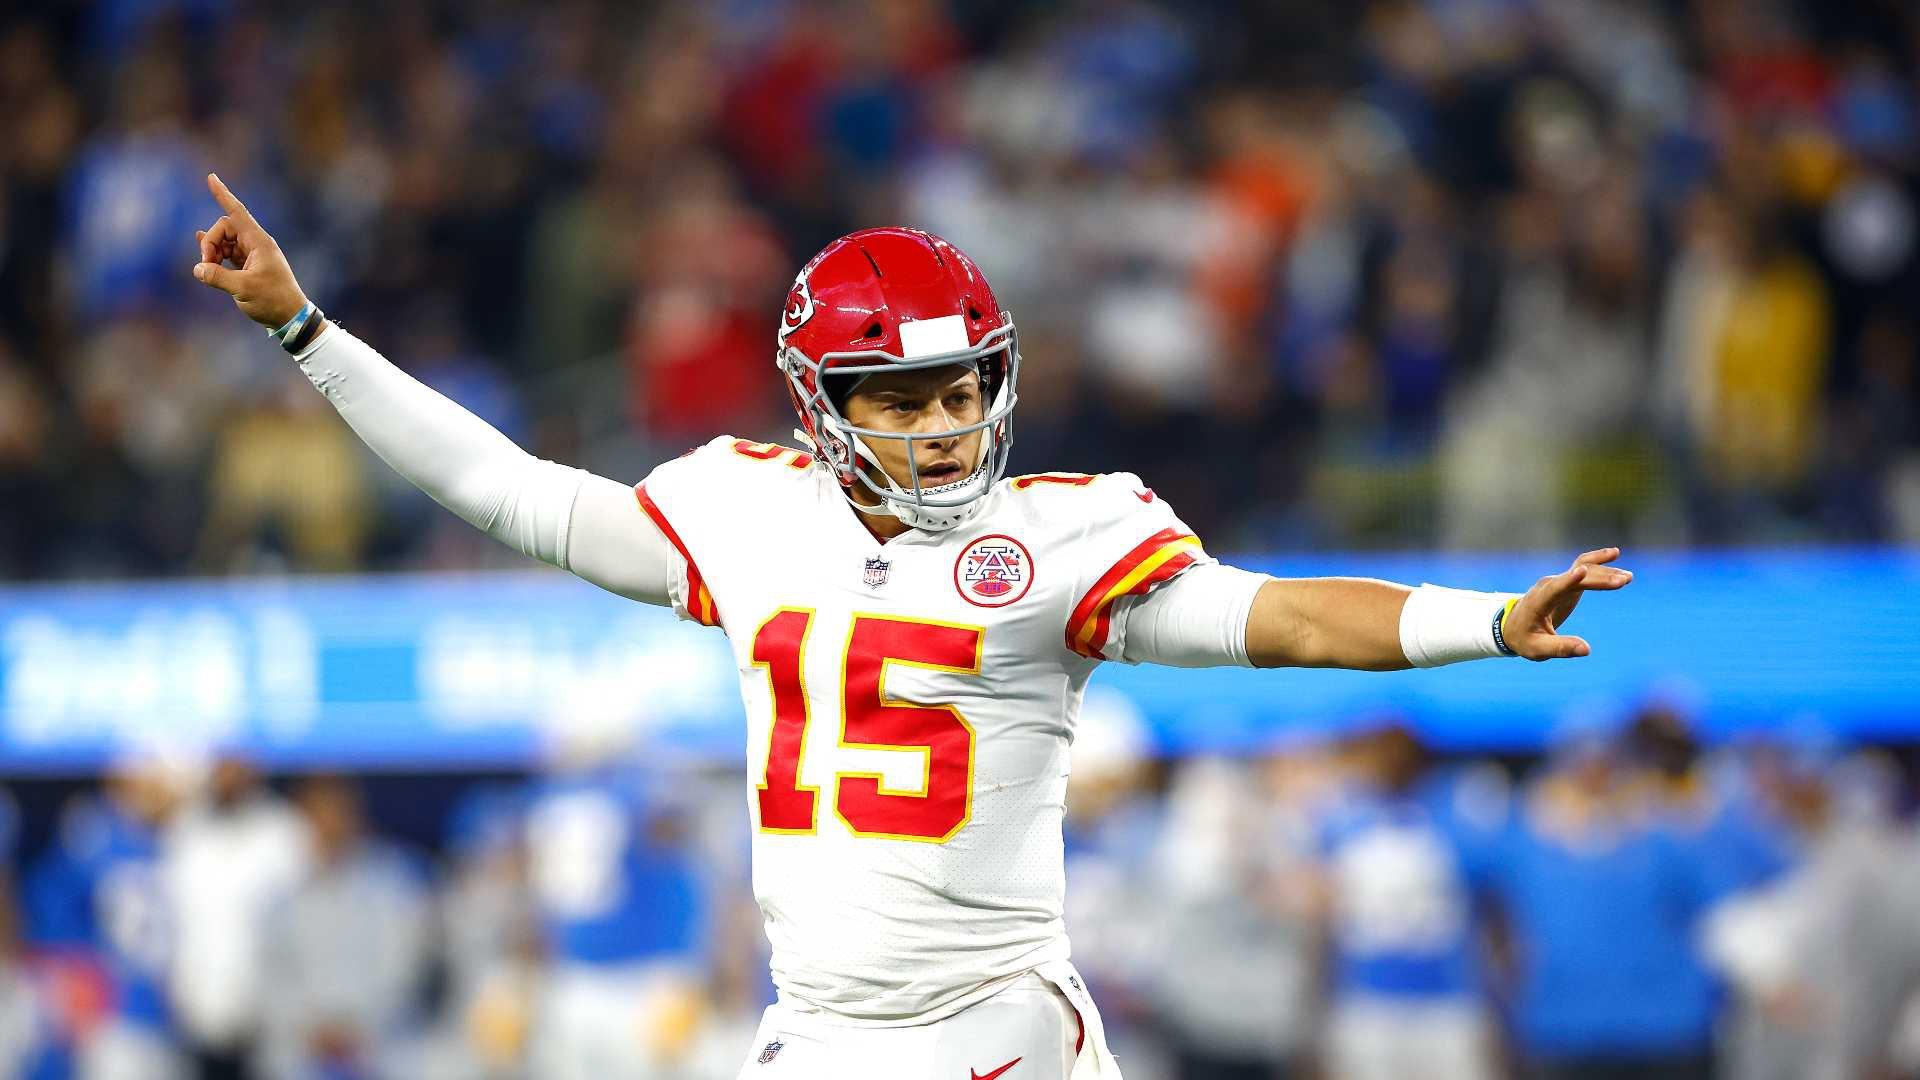 NFL MVP: Are Mahomes’ MVP Hopes Alive After Thursday Night Thriller?